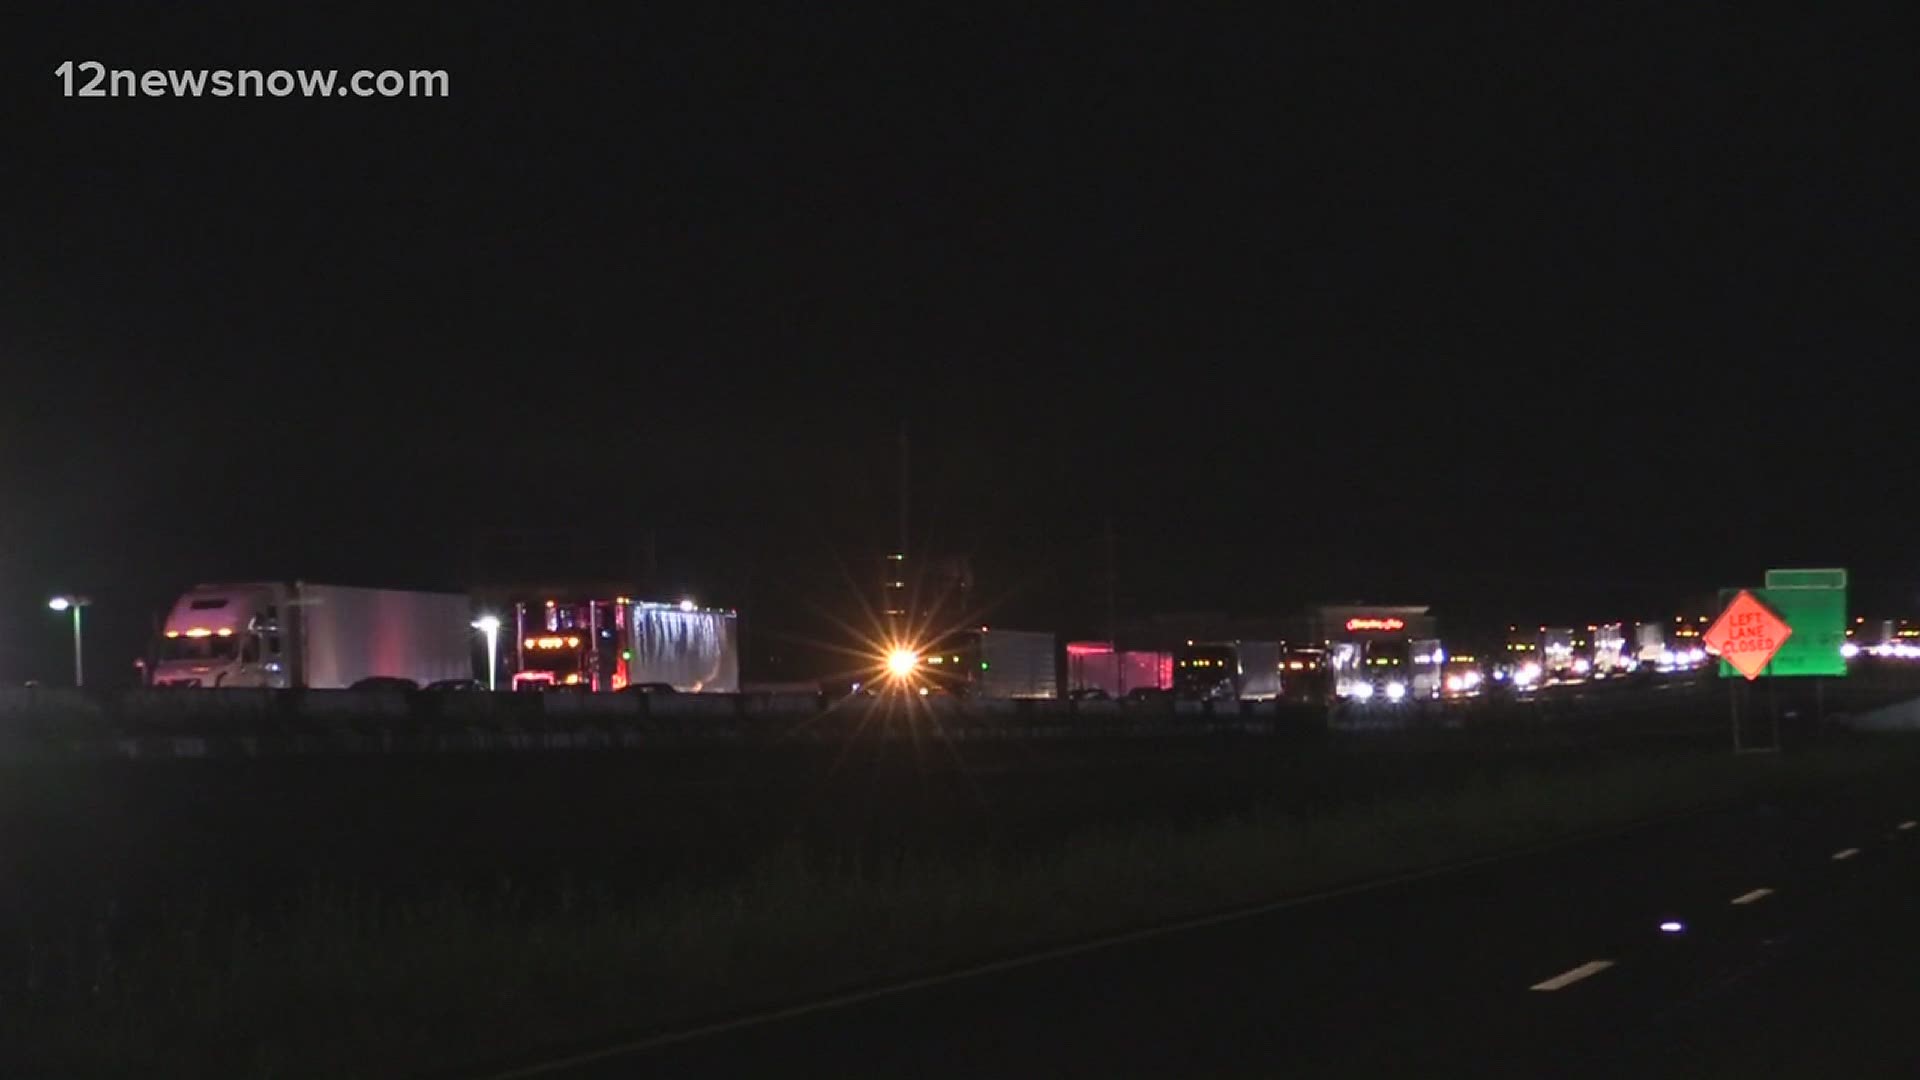 Both east and westbound lanes of I-10 were closed due to fuel on the ground, but no injuries were reported.